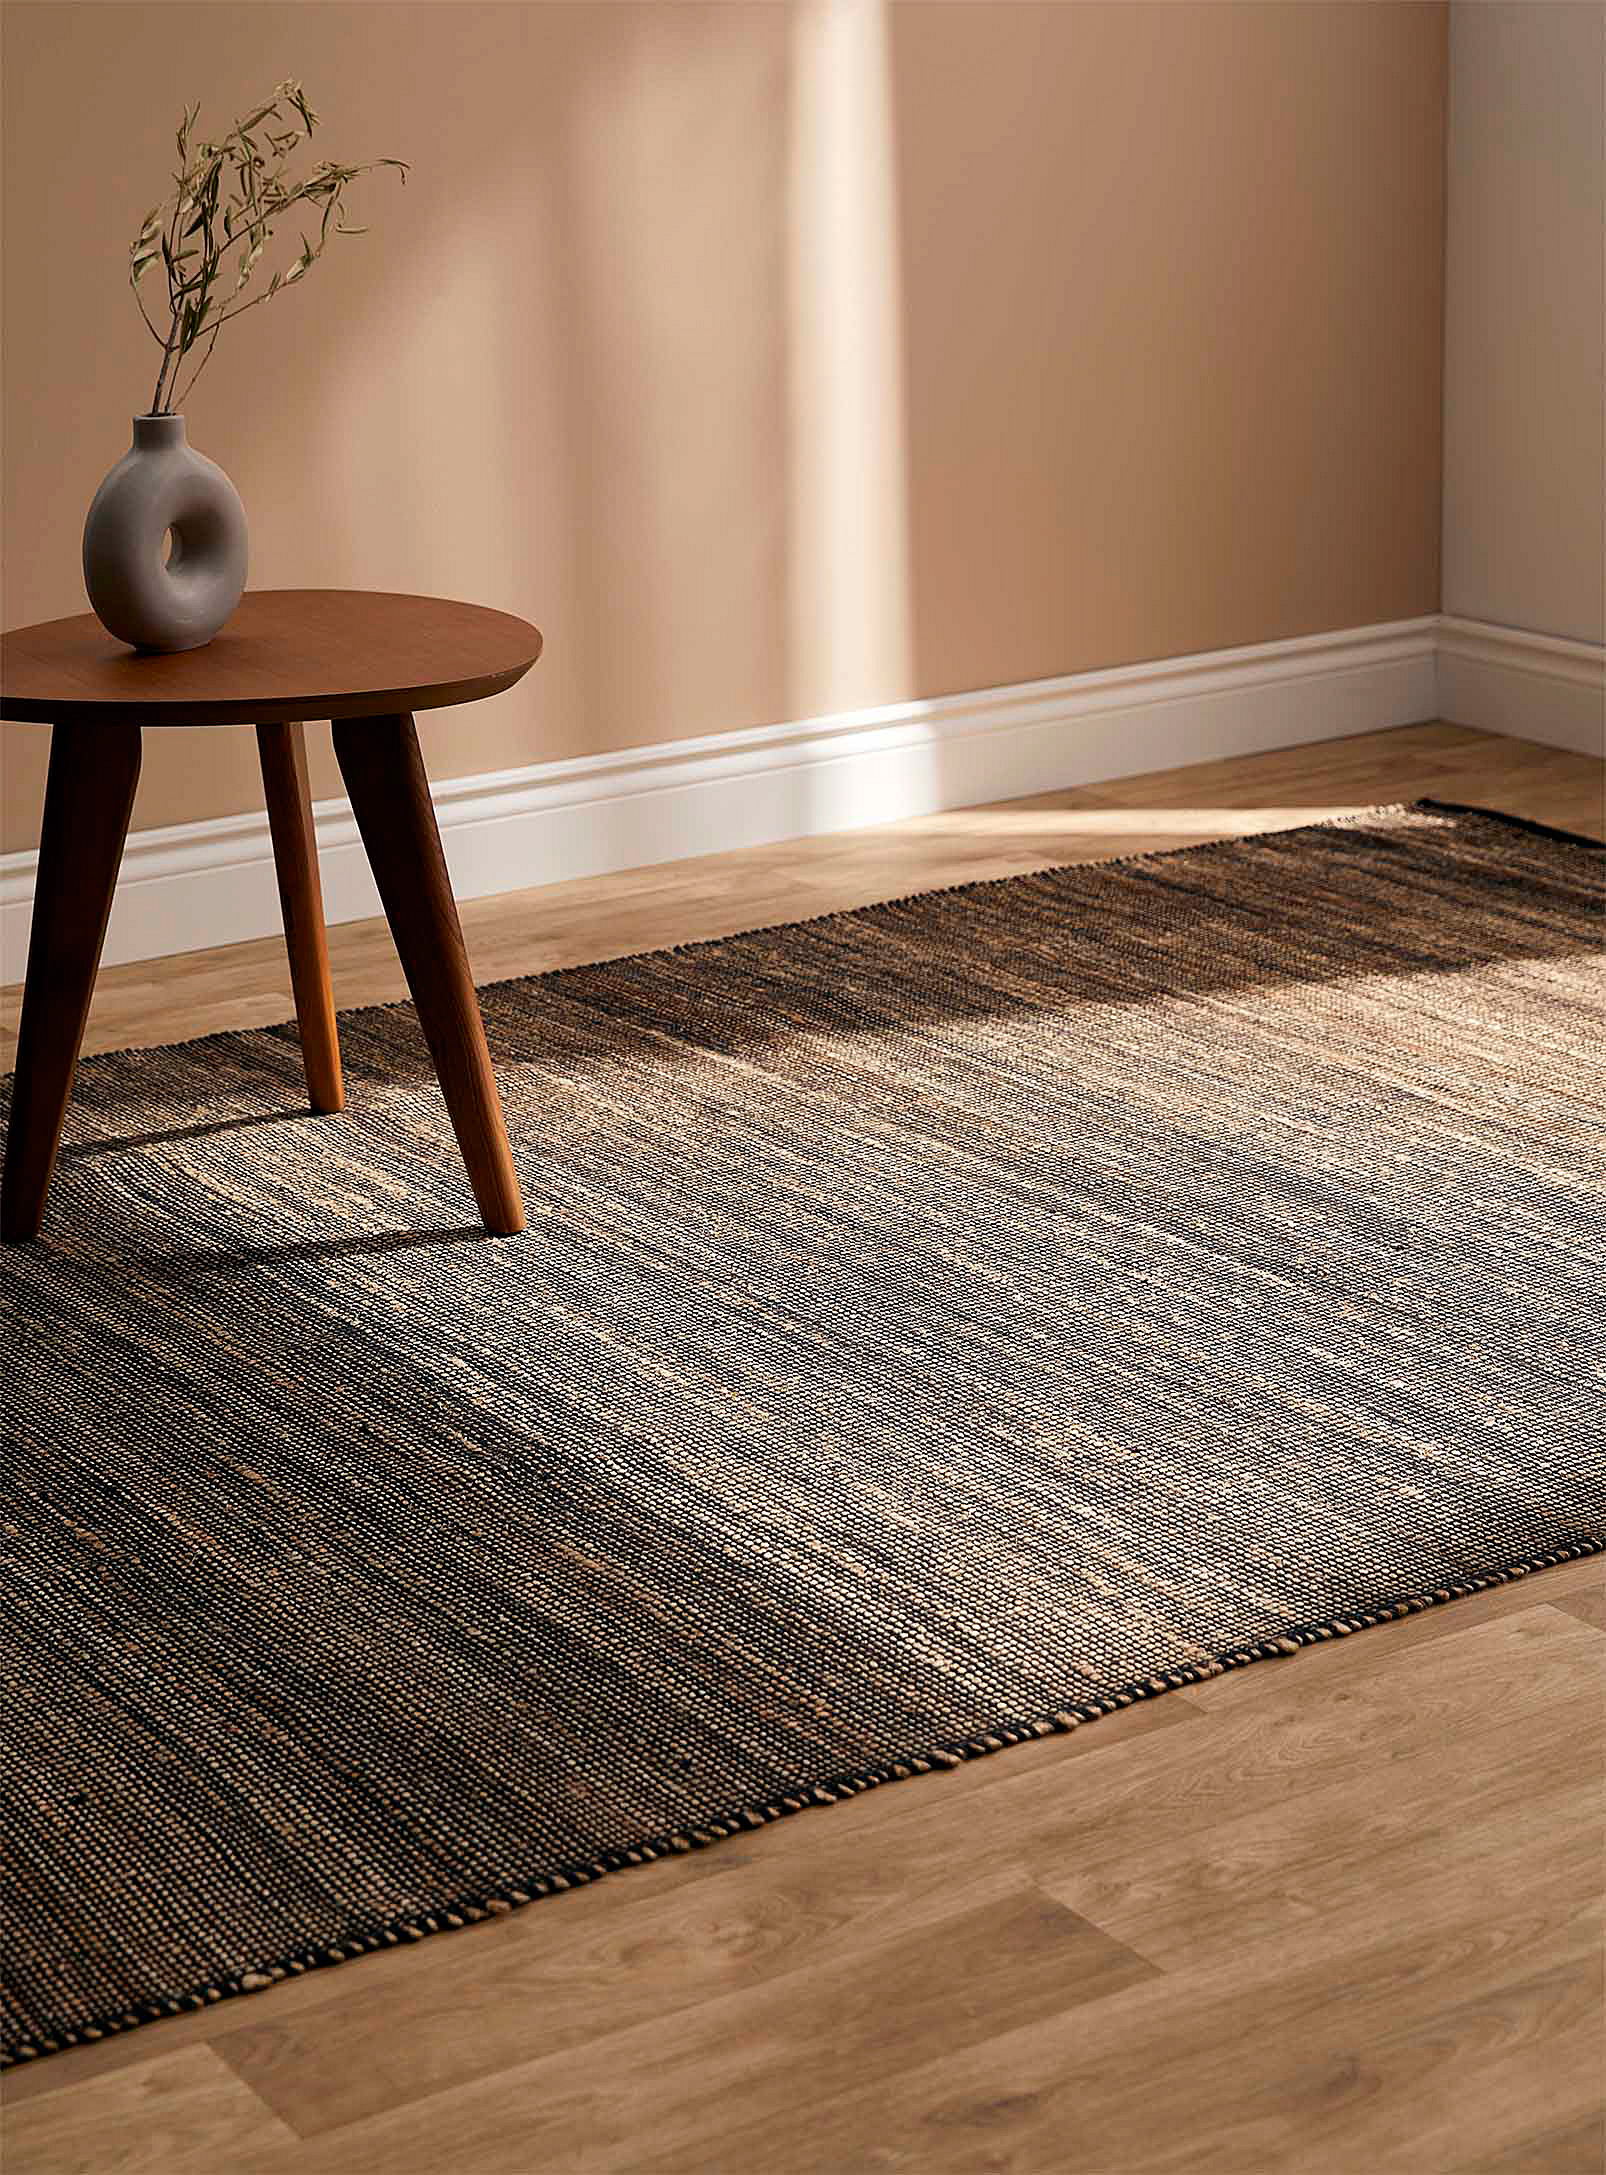 Simons Maison Two-tone Textured Rug See Available Sizes In Patterned Black